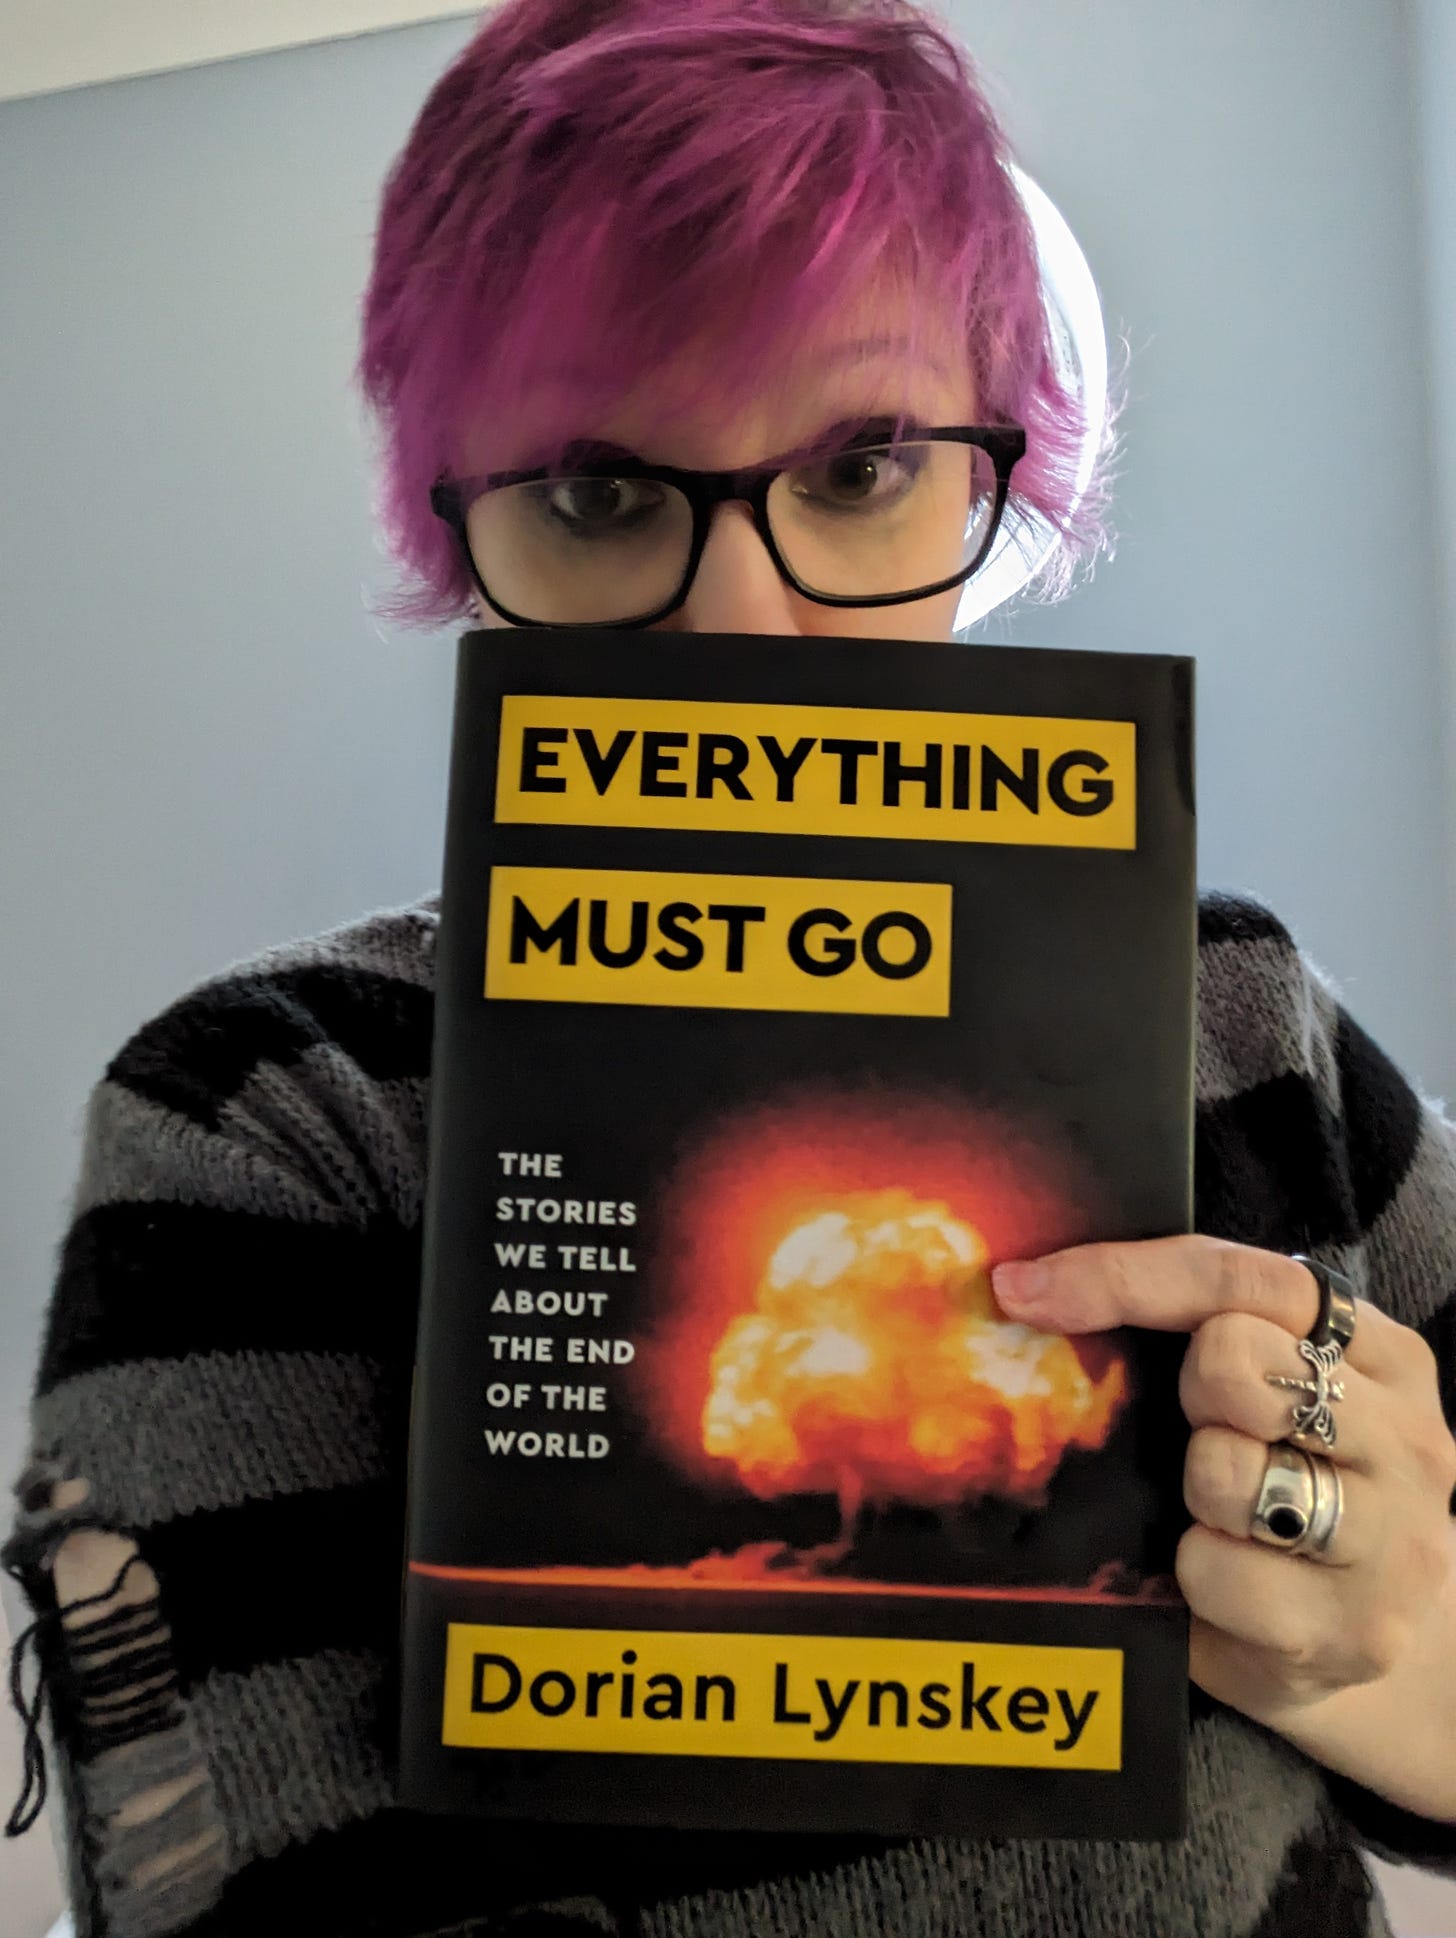 A woman with pink hair, a black and grey jumper, and rings, holding a copy of Everything Must Go by Dorian Lynskey, a large black volume with yellow-backed title and an image of an explosion